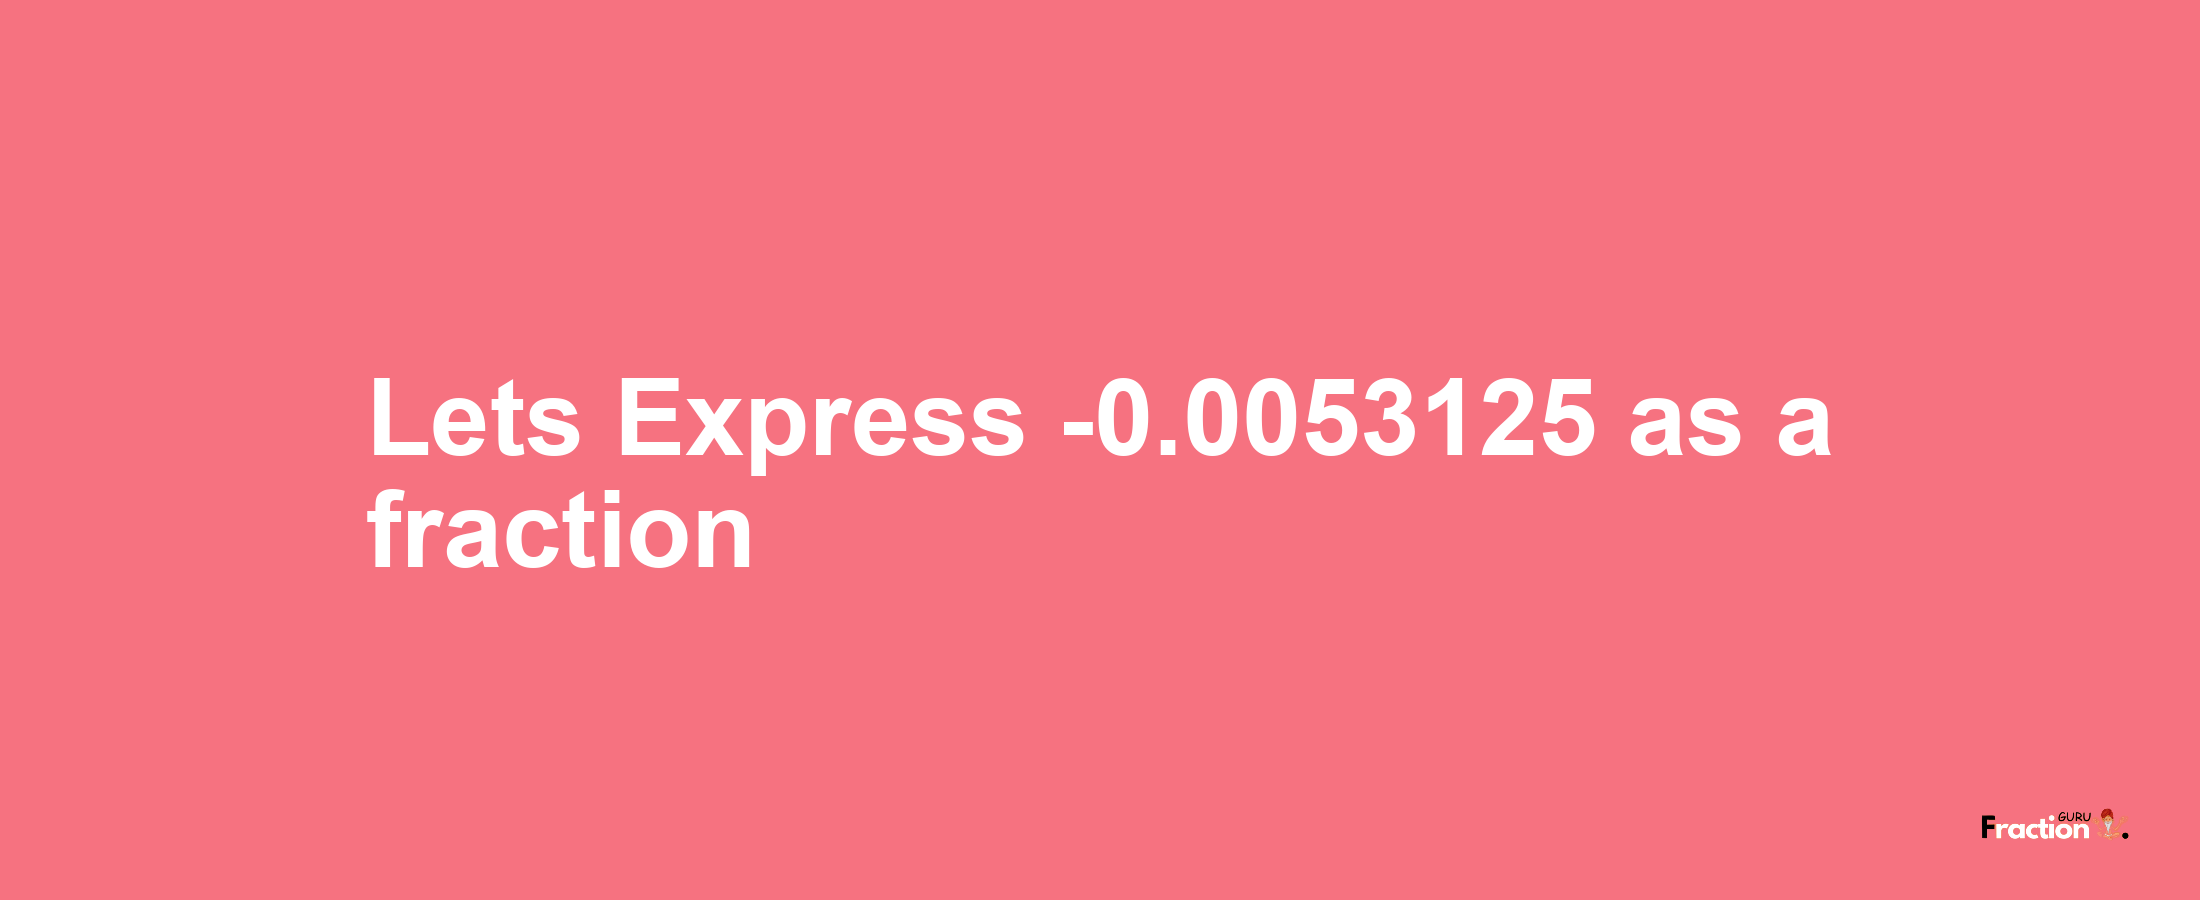 Lets Express -0.0053125 as afraction